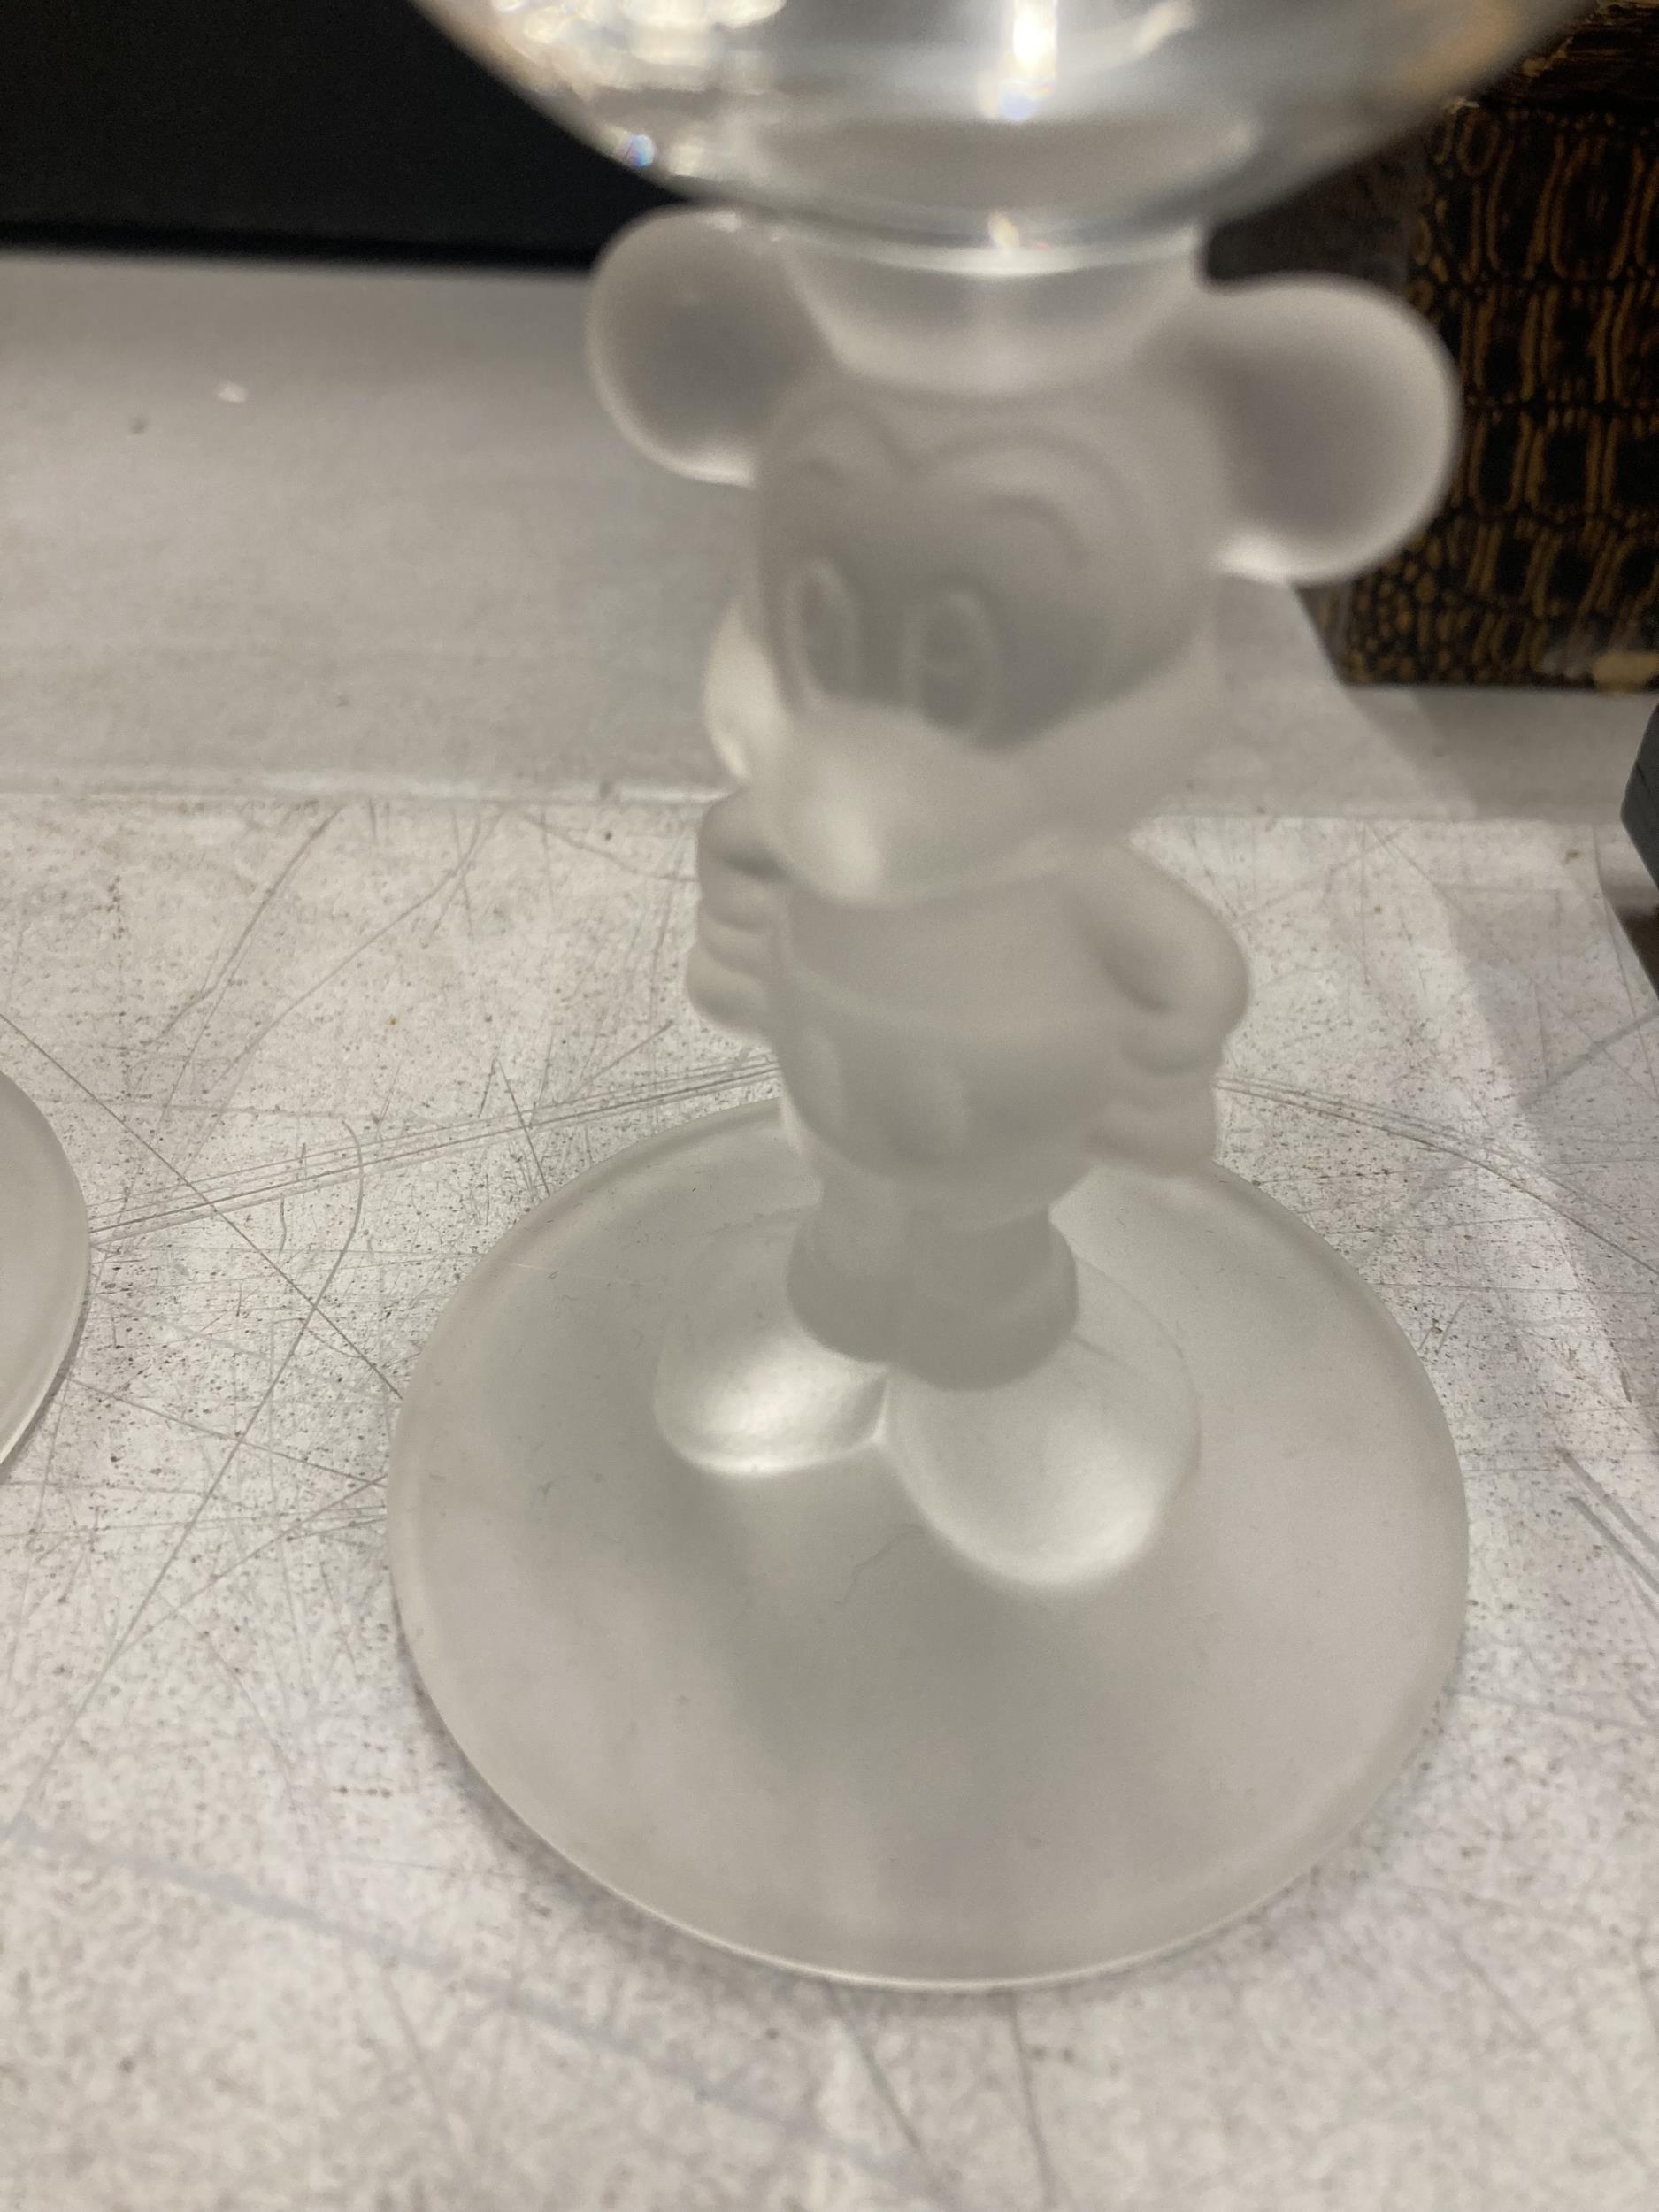 TWO FROSTED GLASS DISNEY MICKEY & MINNIE HOUSE DESIGN GLASSES - Image 2 of 3